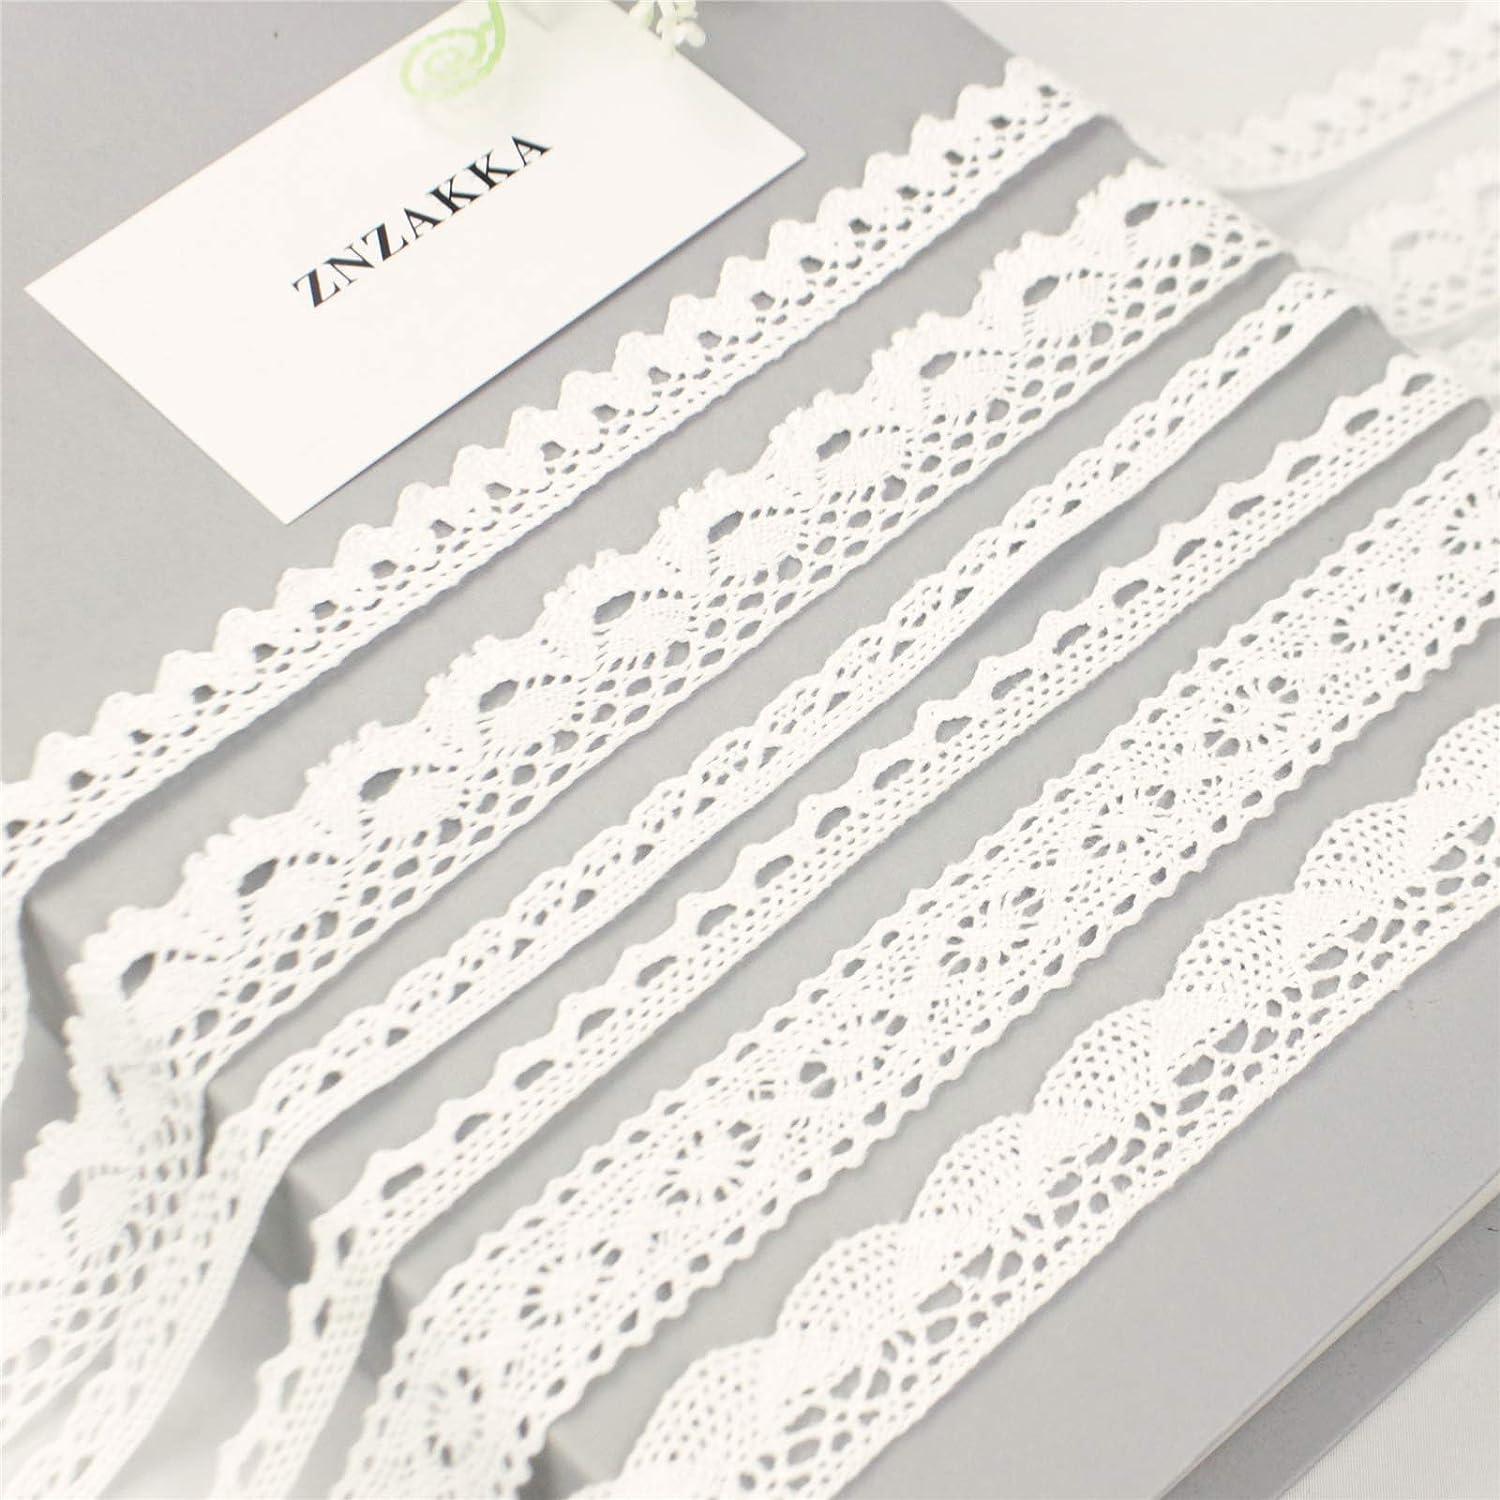 New 5 Yards White Cottong Crochet Lace Trim 3W – Sweet Crafty Tools